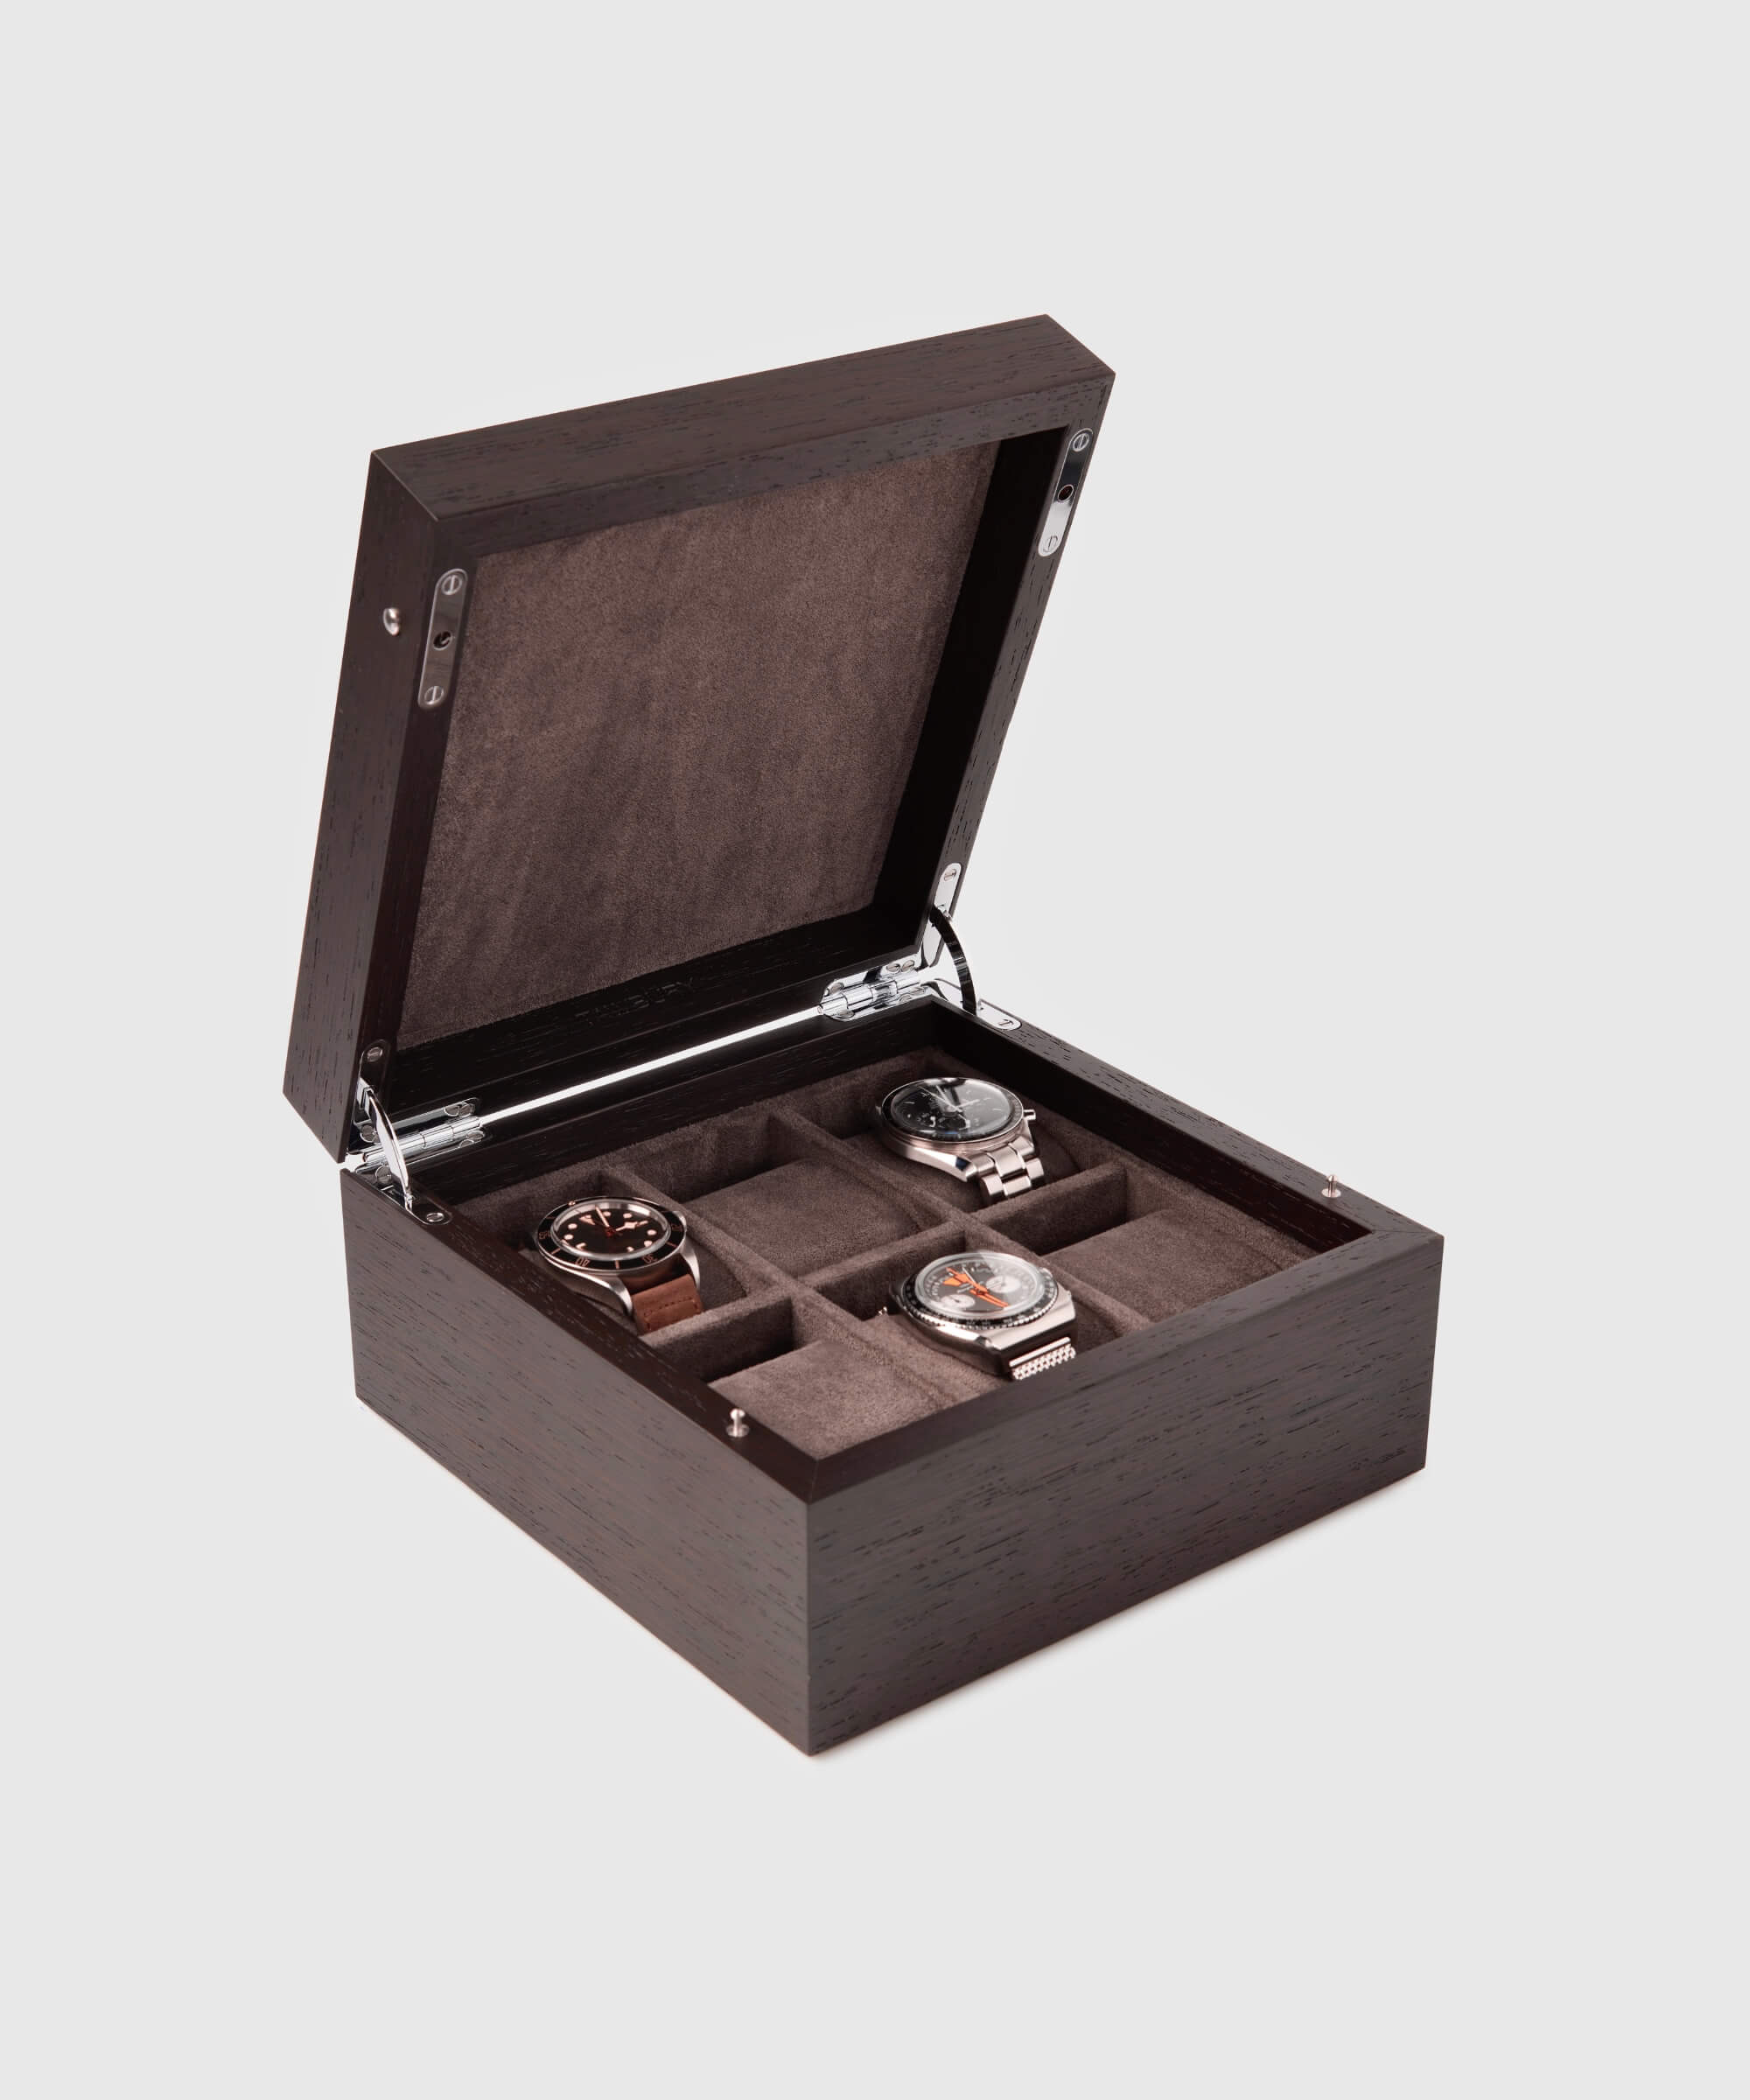 The TAWBURY Grove 6 Slot Watch Box with Solid Lid - Kassod showcases an exquisite selection of four timepieces.